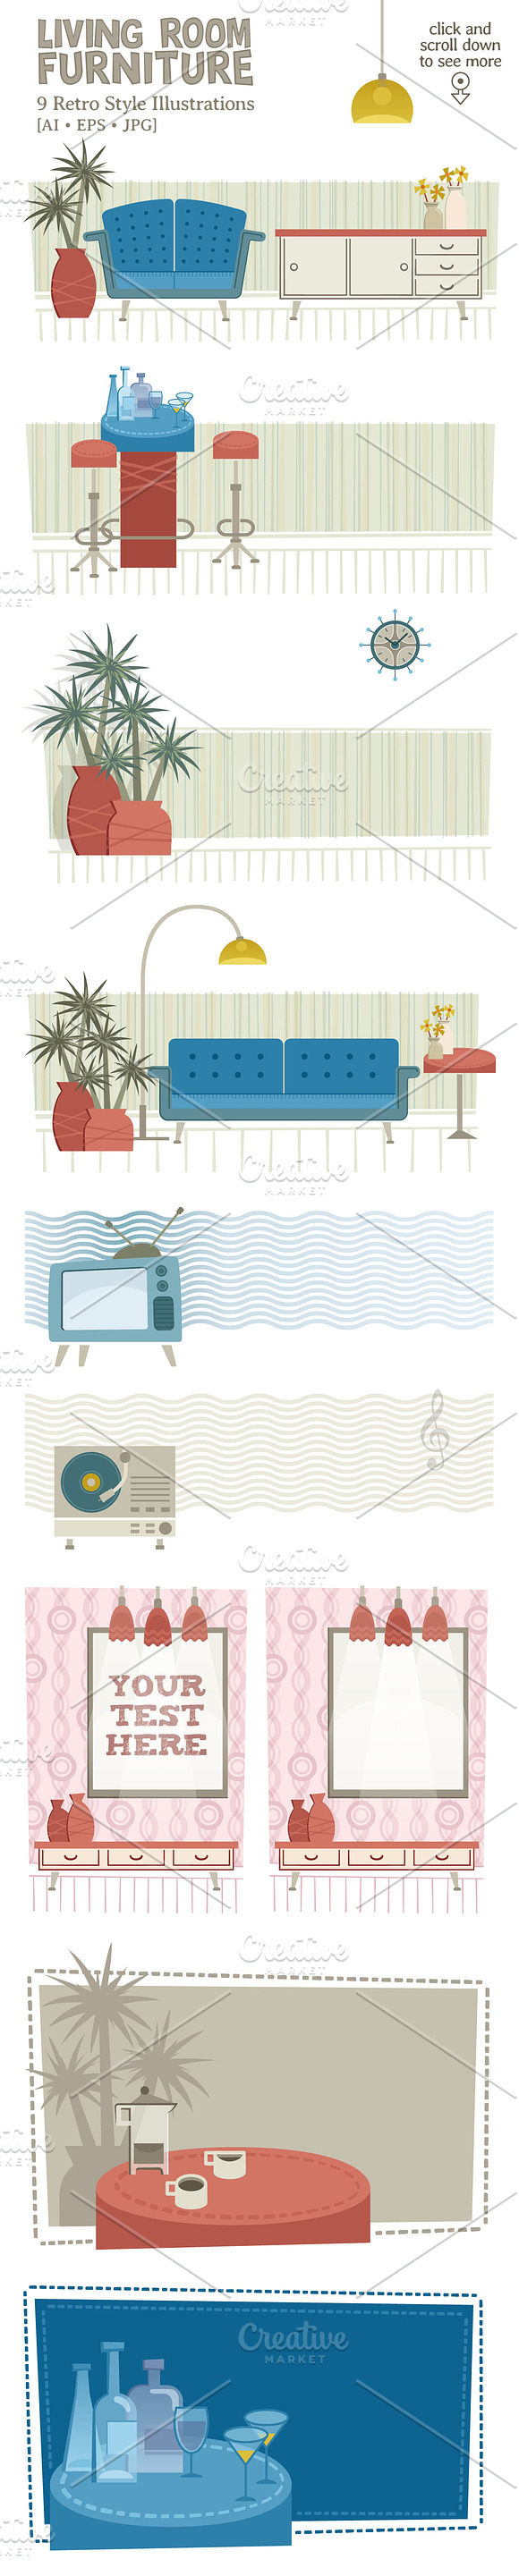 Living room furniture in Illustrations - product preview 2